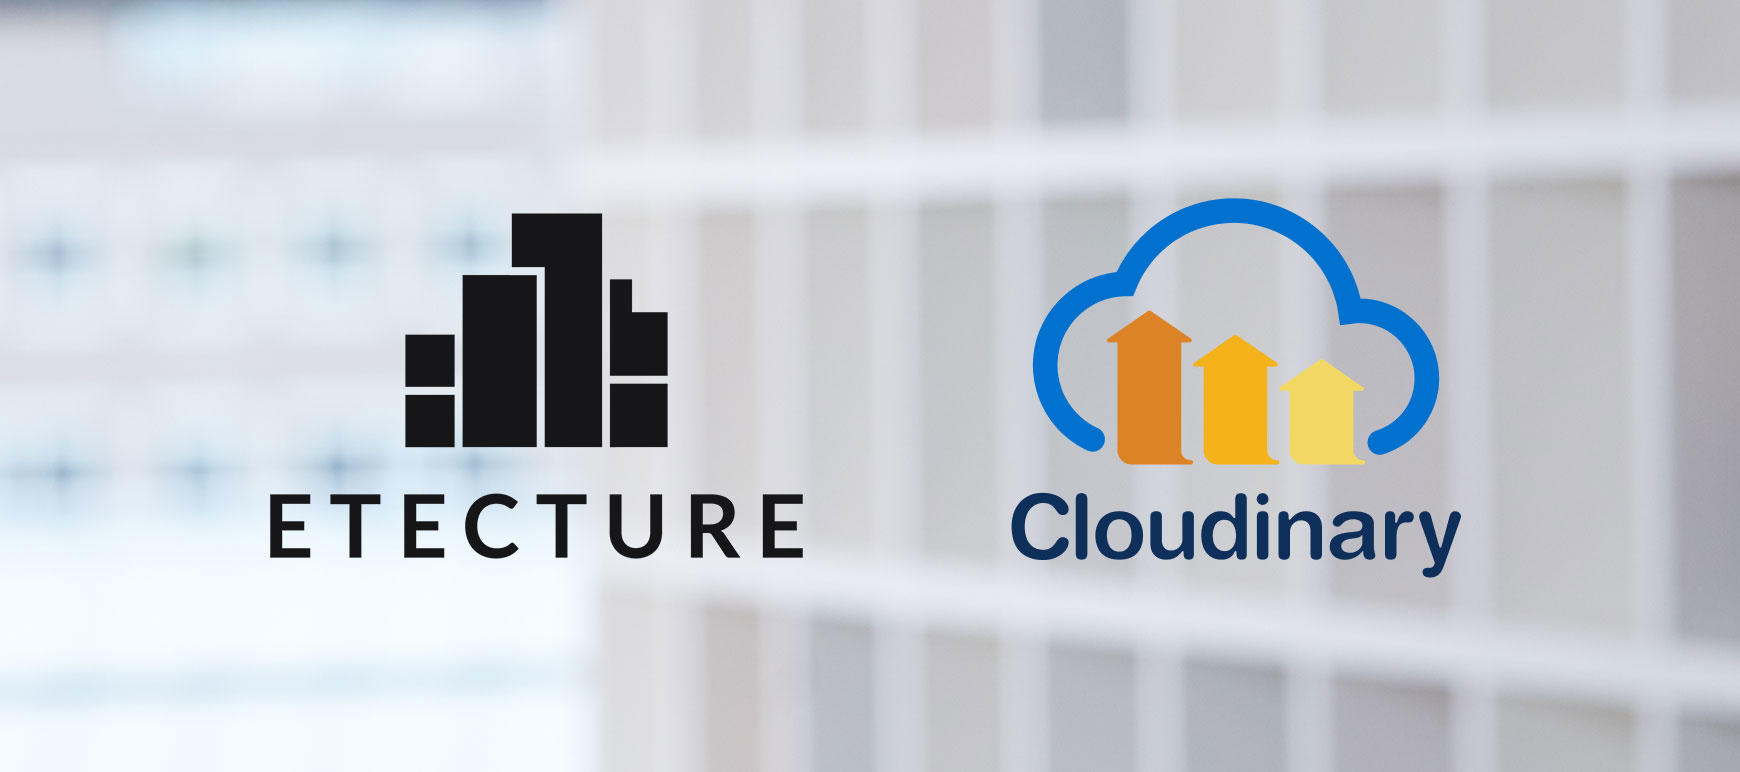 Cloudinary ETECTURE